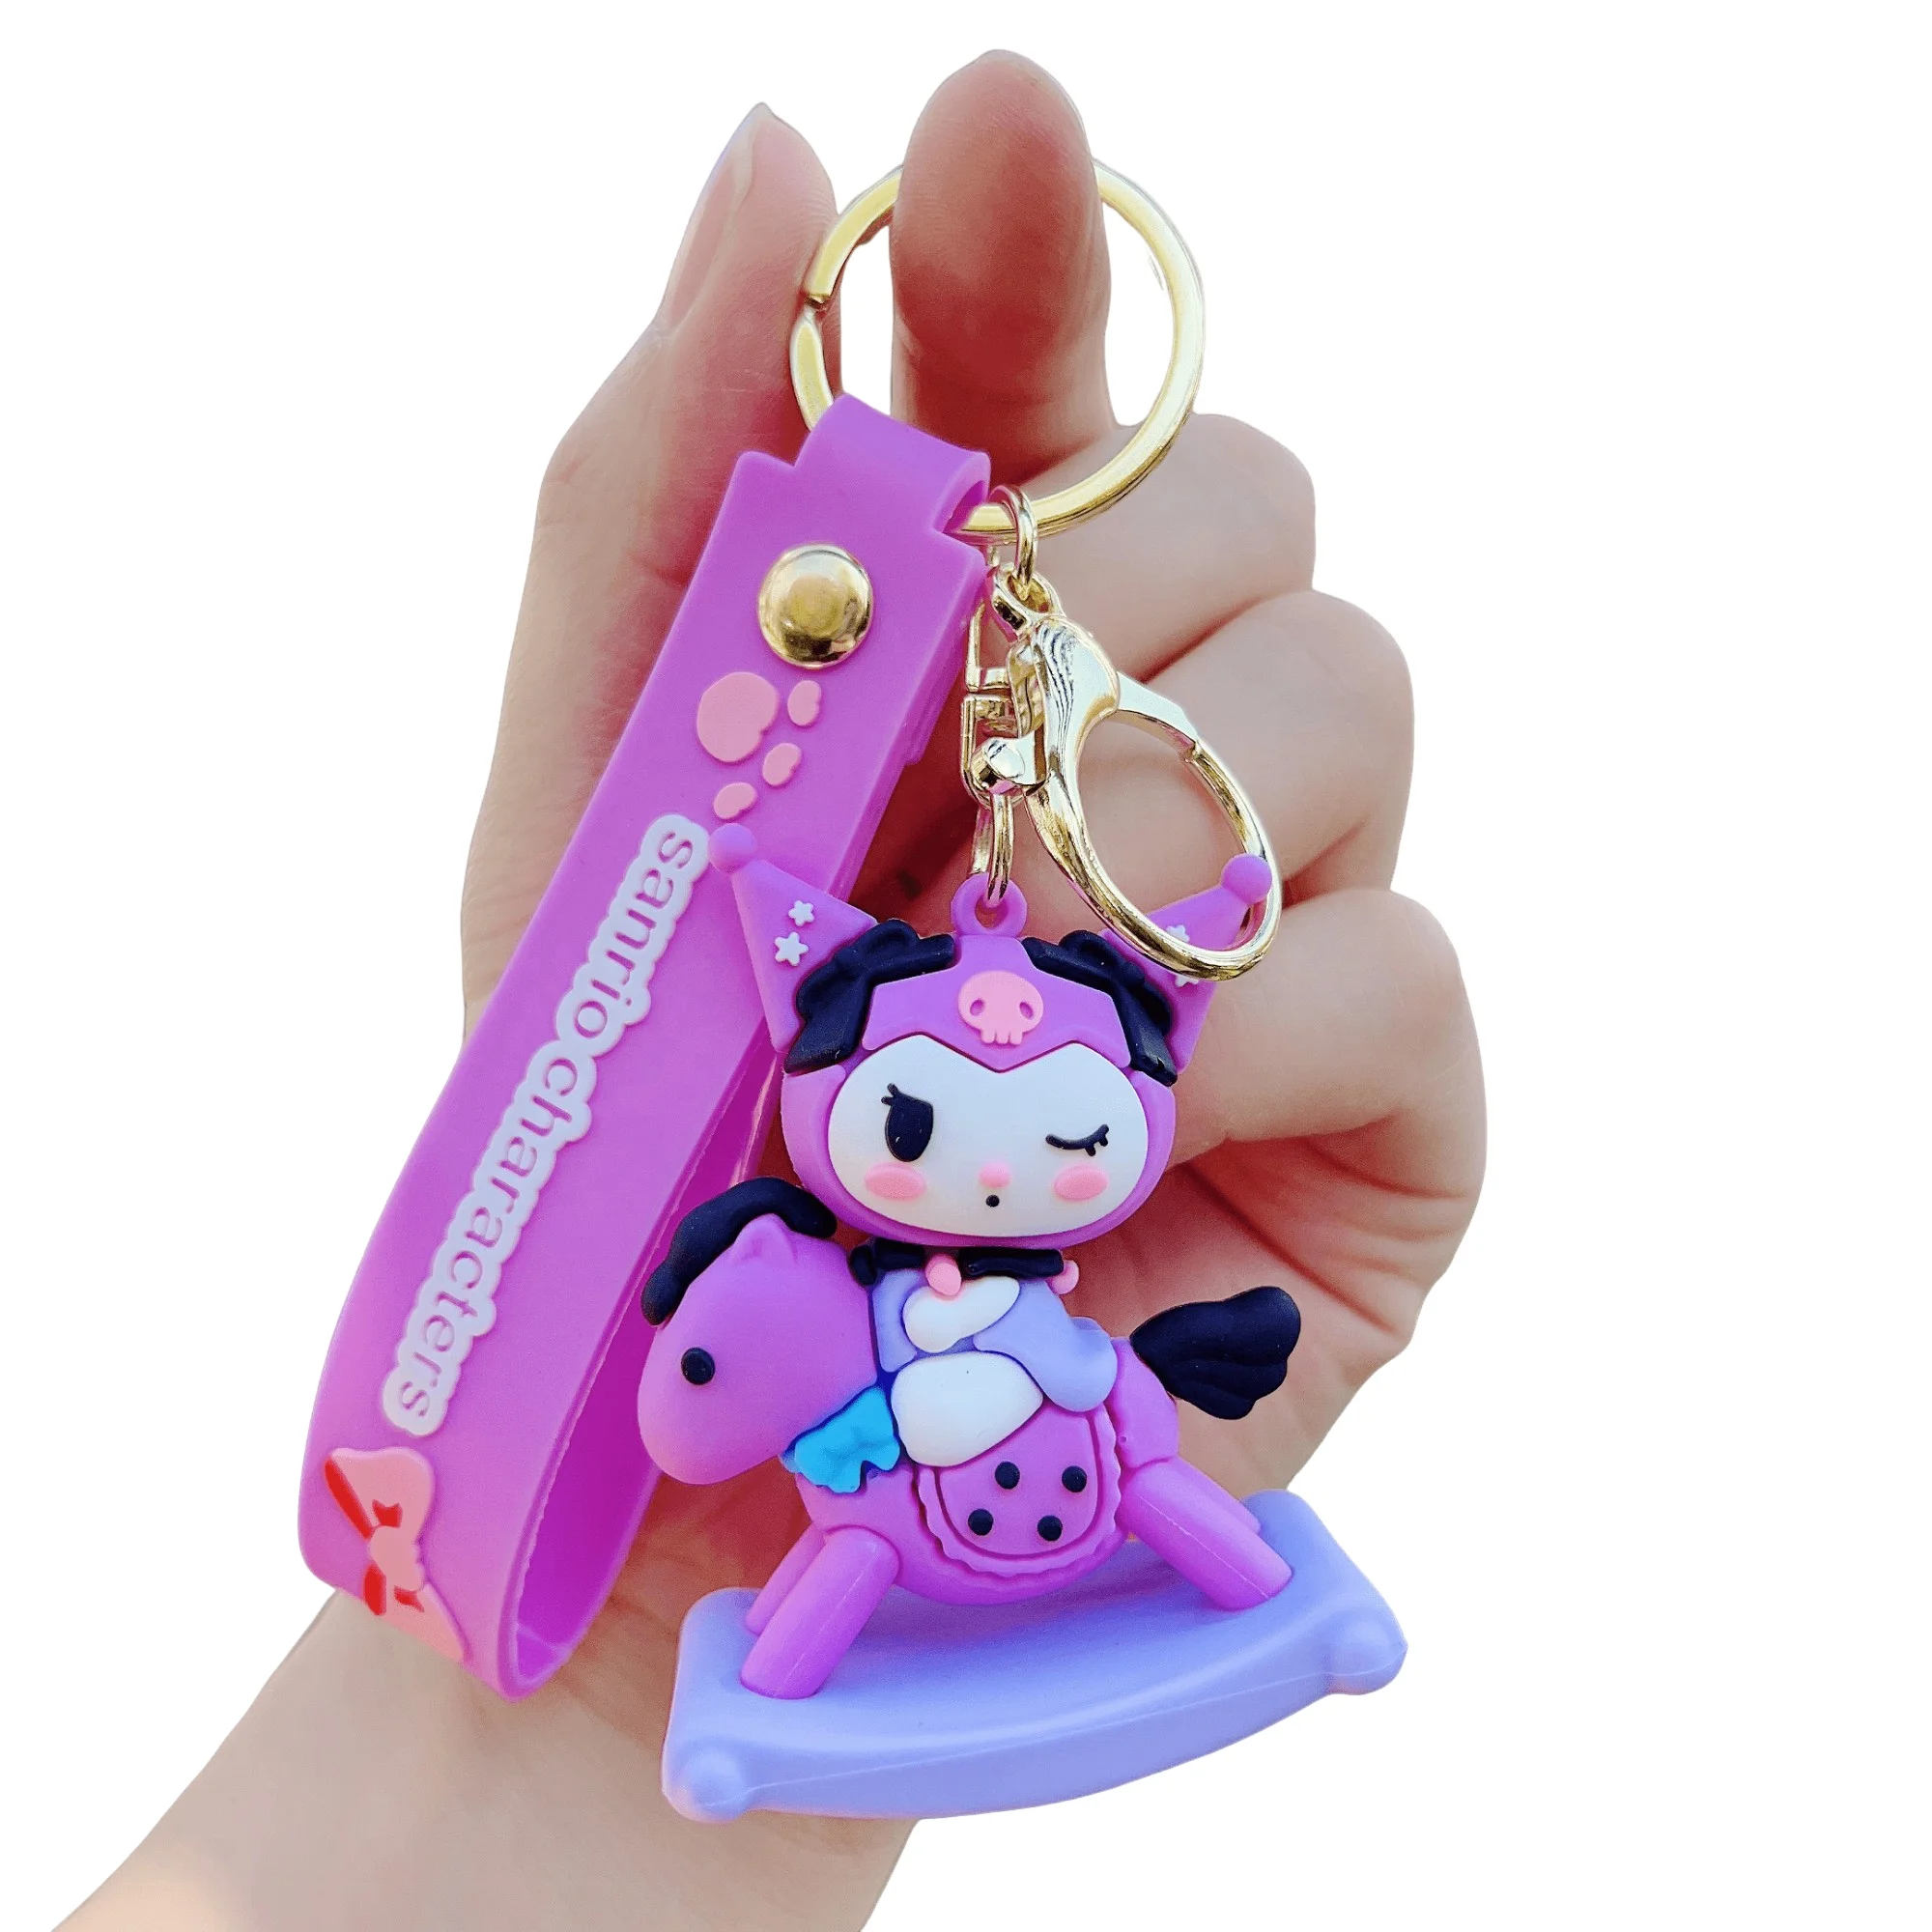 Hot selling High quality New Sanrio Series Cute Kitty Doll Wooden horse keyring Decoration Car Bag Pendant Kuromi Keychain